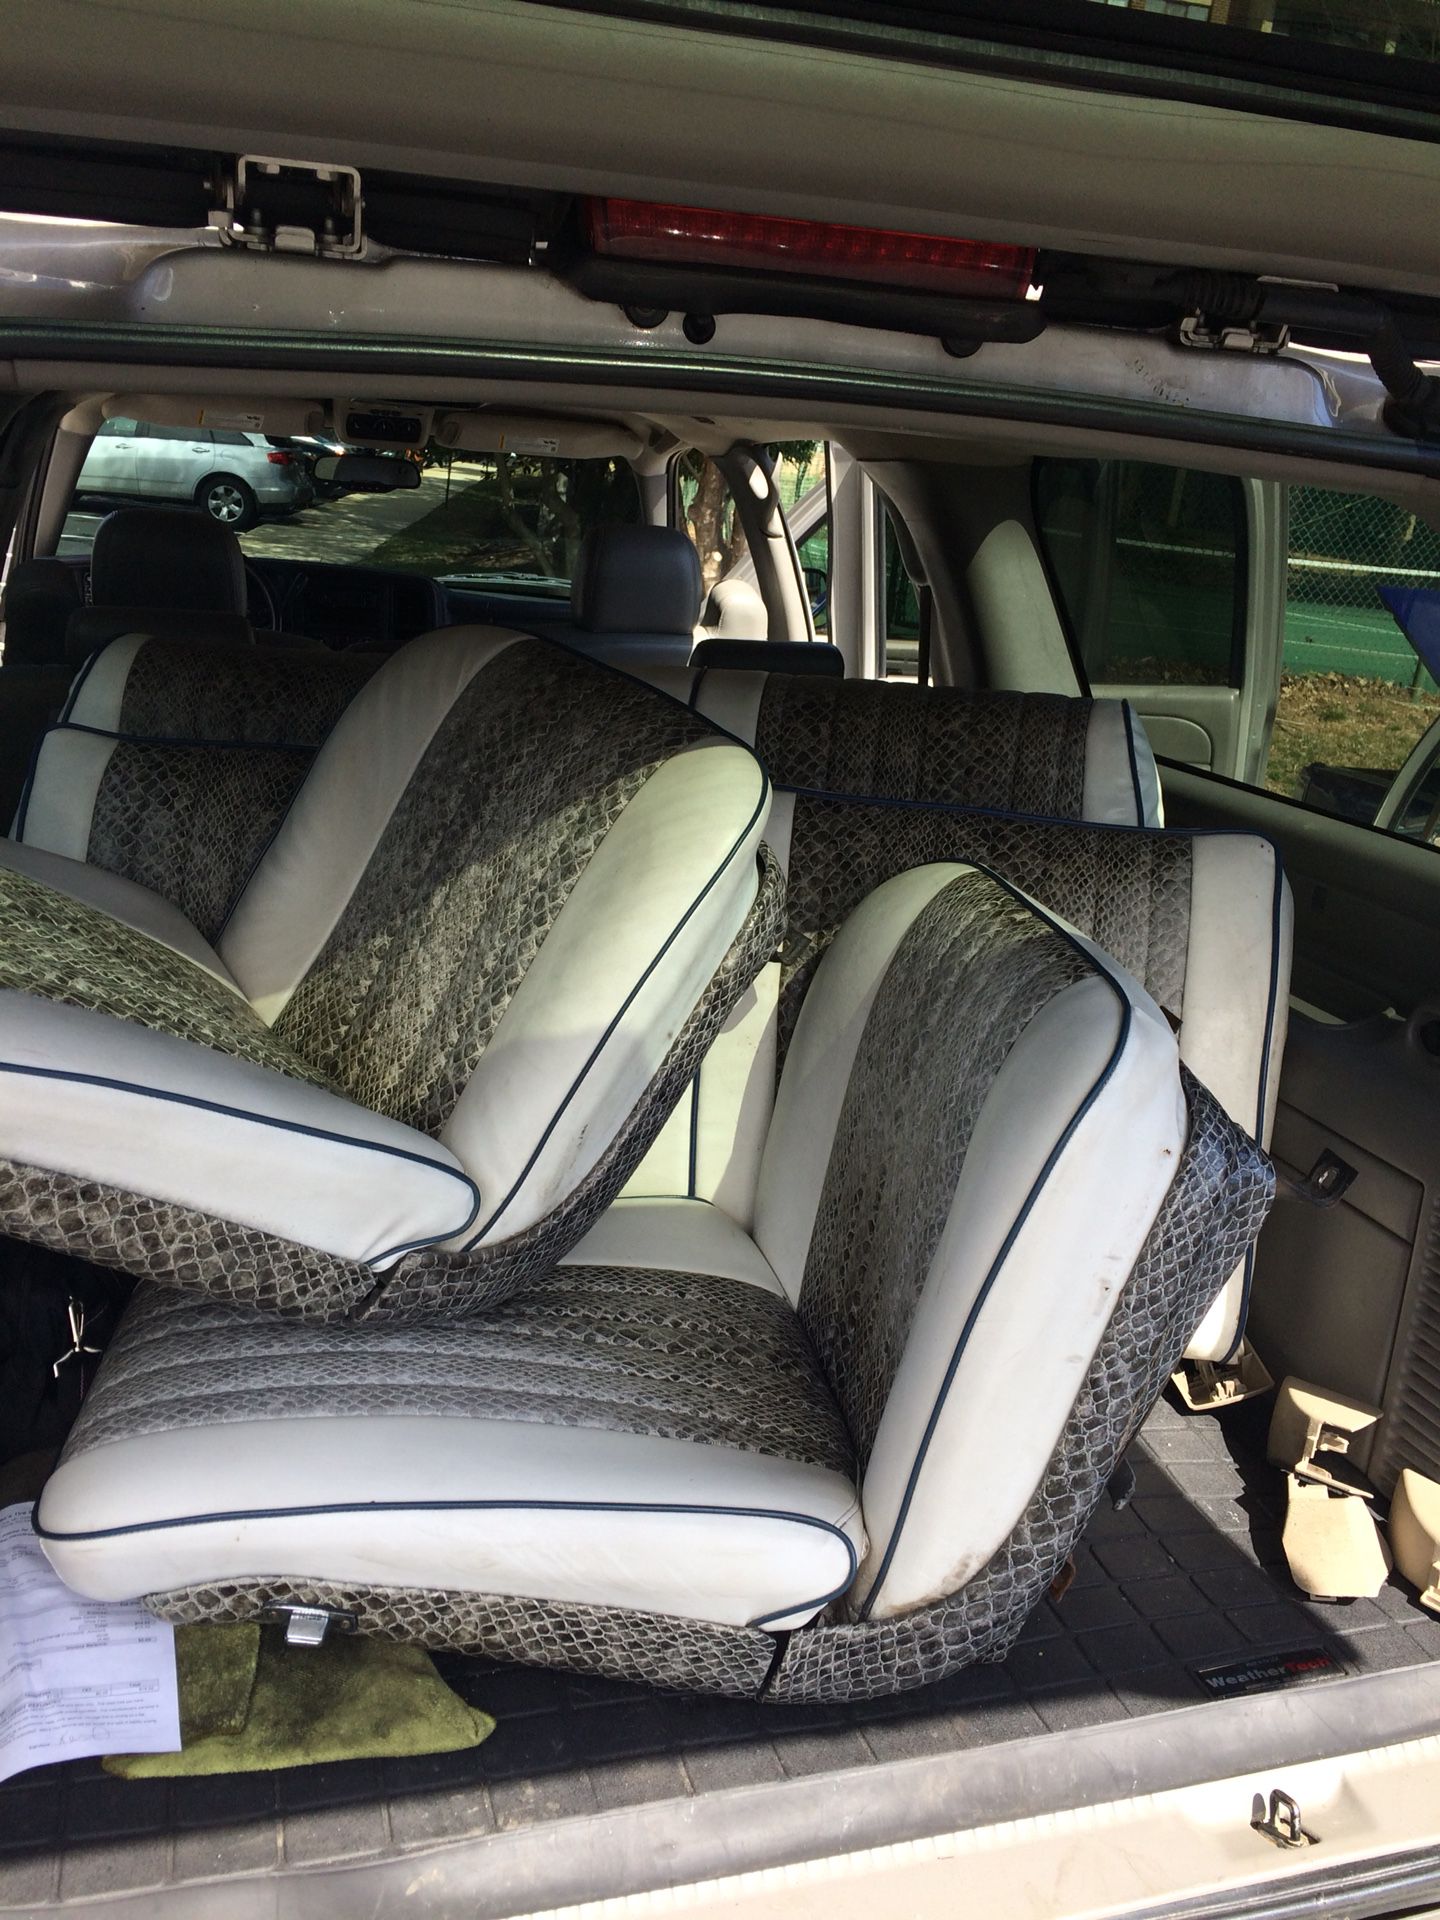 Leather seats boa constrictor snakeskin